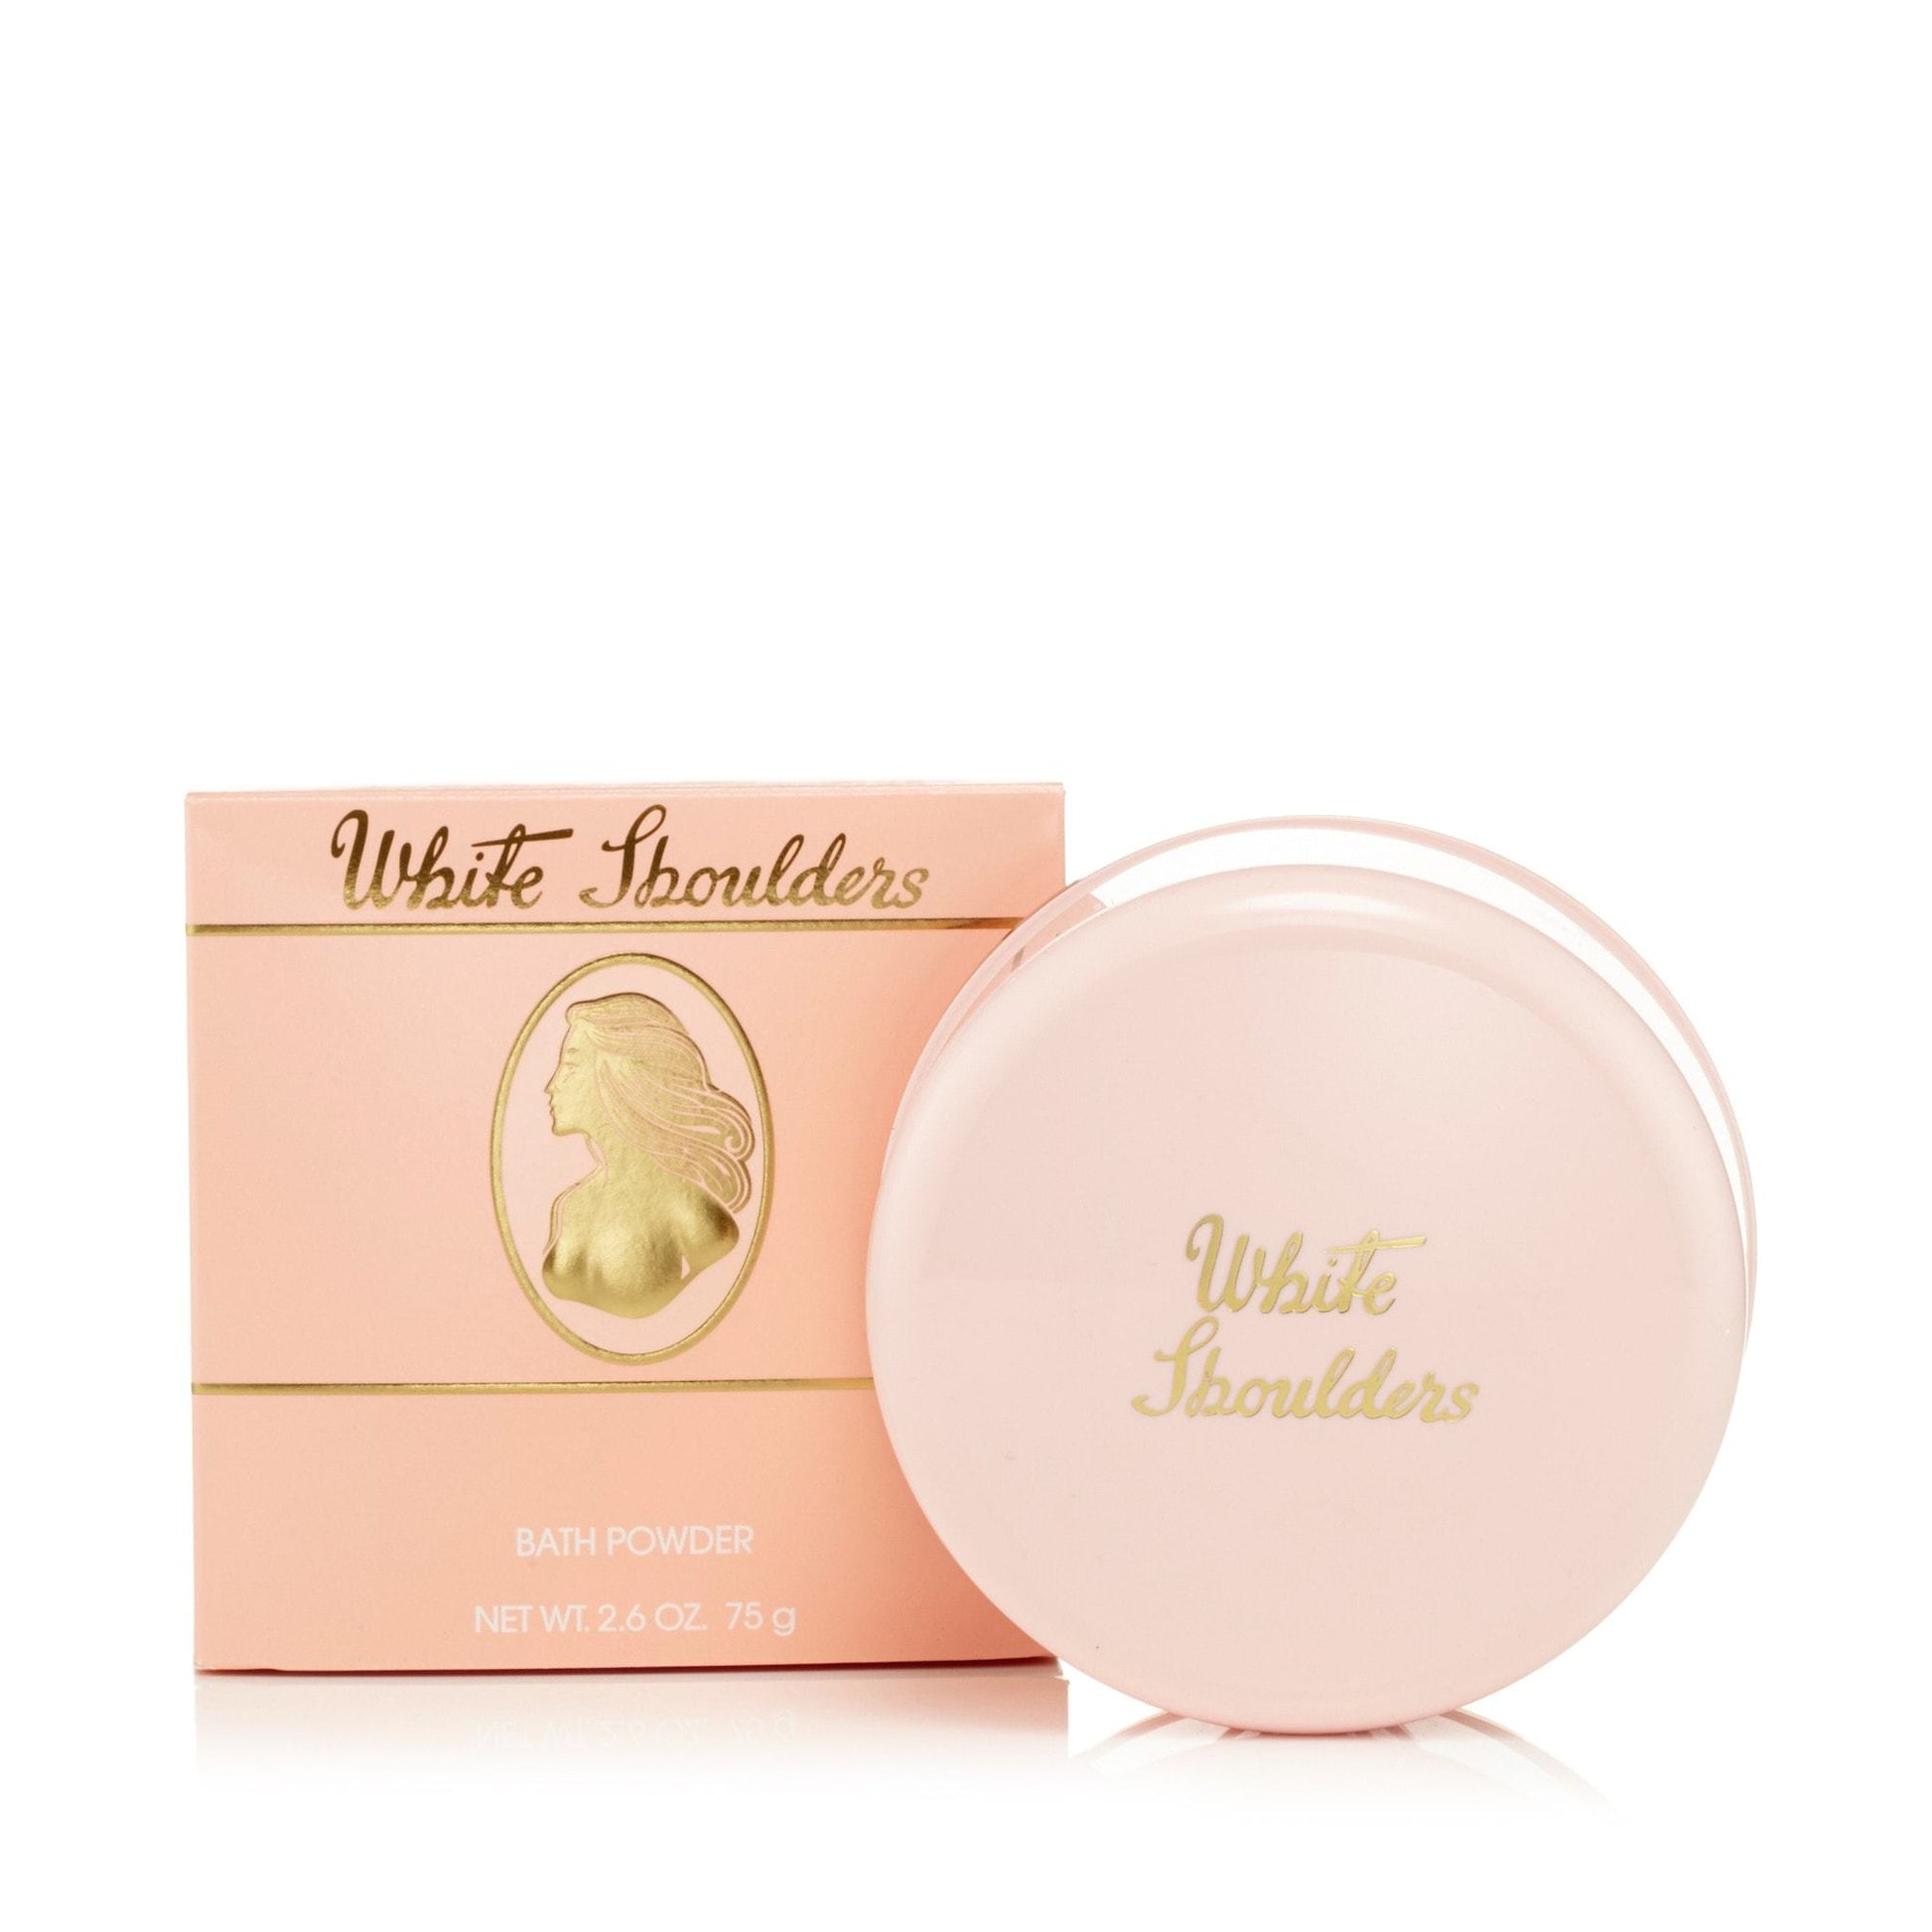 White Shoulders Dusting Powder for Women by Evyan, Product image 2